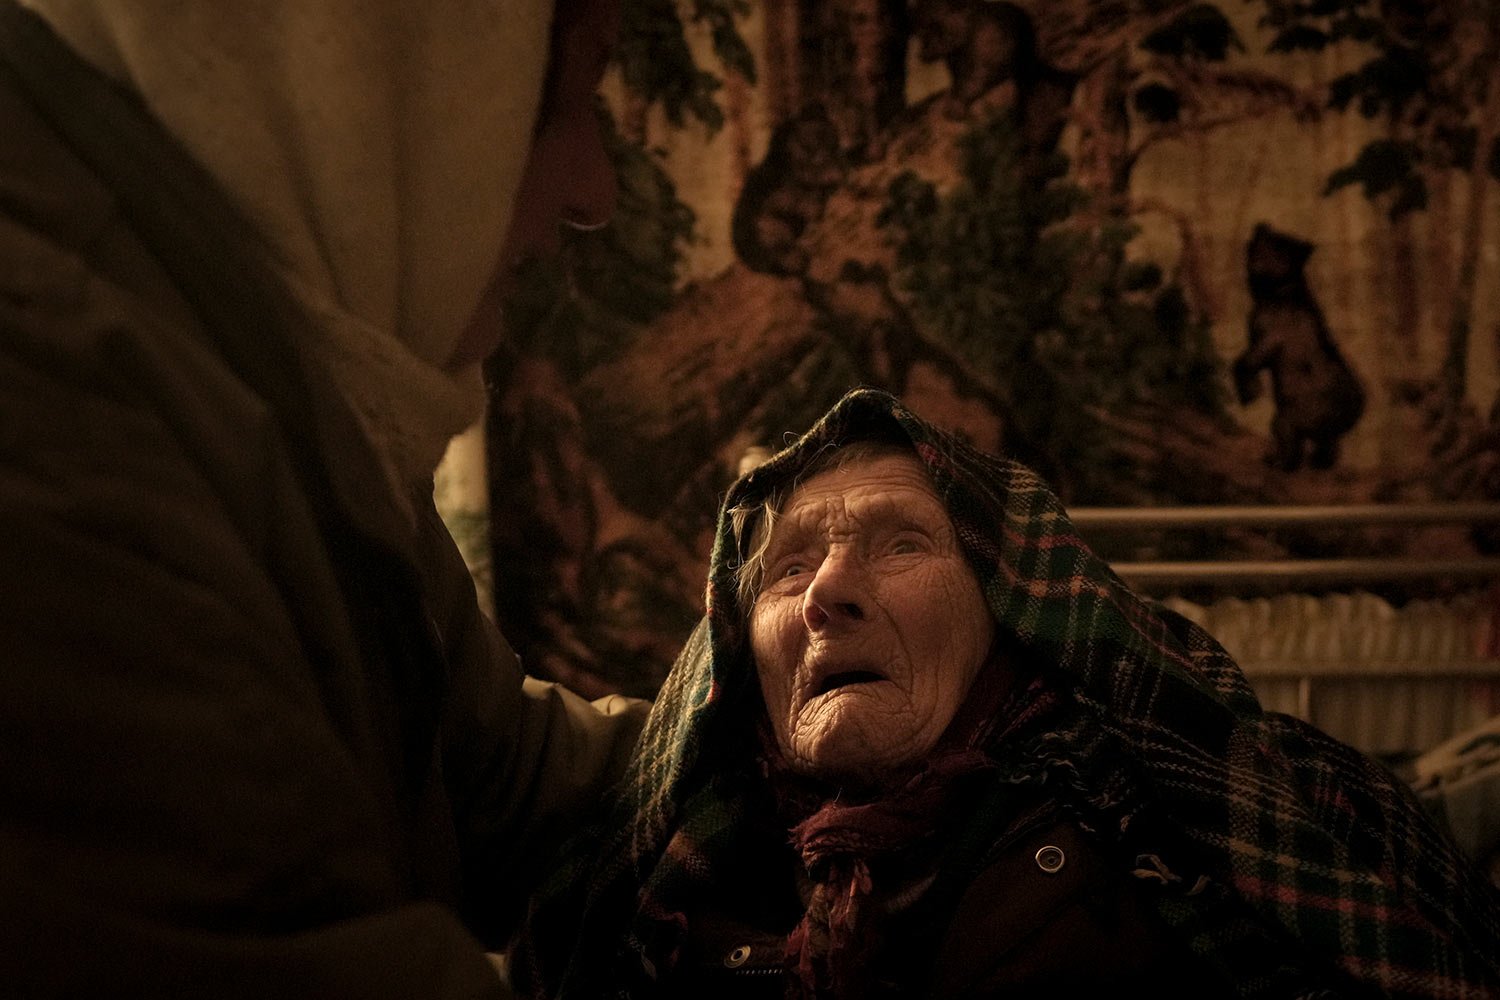  Motria Oleksiienko, 99, traumatized by the Russian occupation, is comforted by Tetiana Oleksiienko in a room without heating in the village of Andriivka, Ukraine, heavily affected by fighting between Russian and Ukrainian forces, Wednesday, April 6,